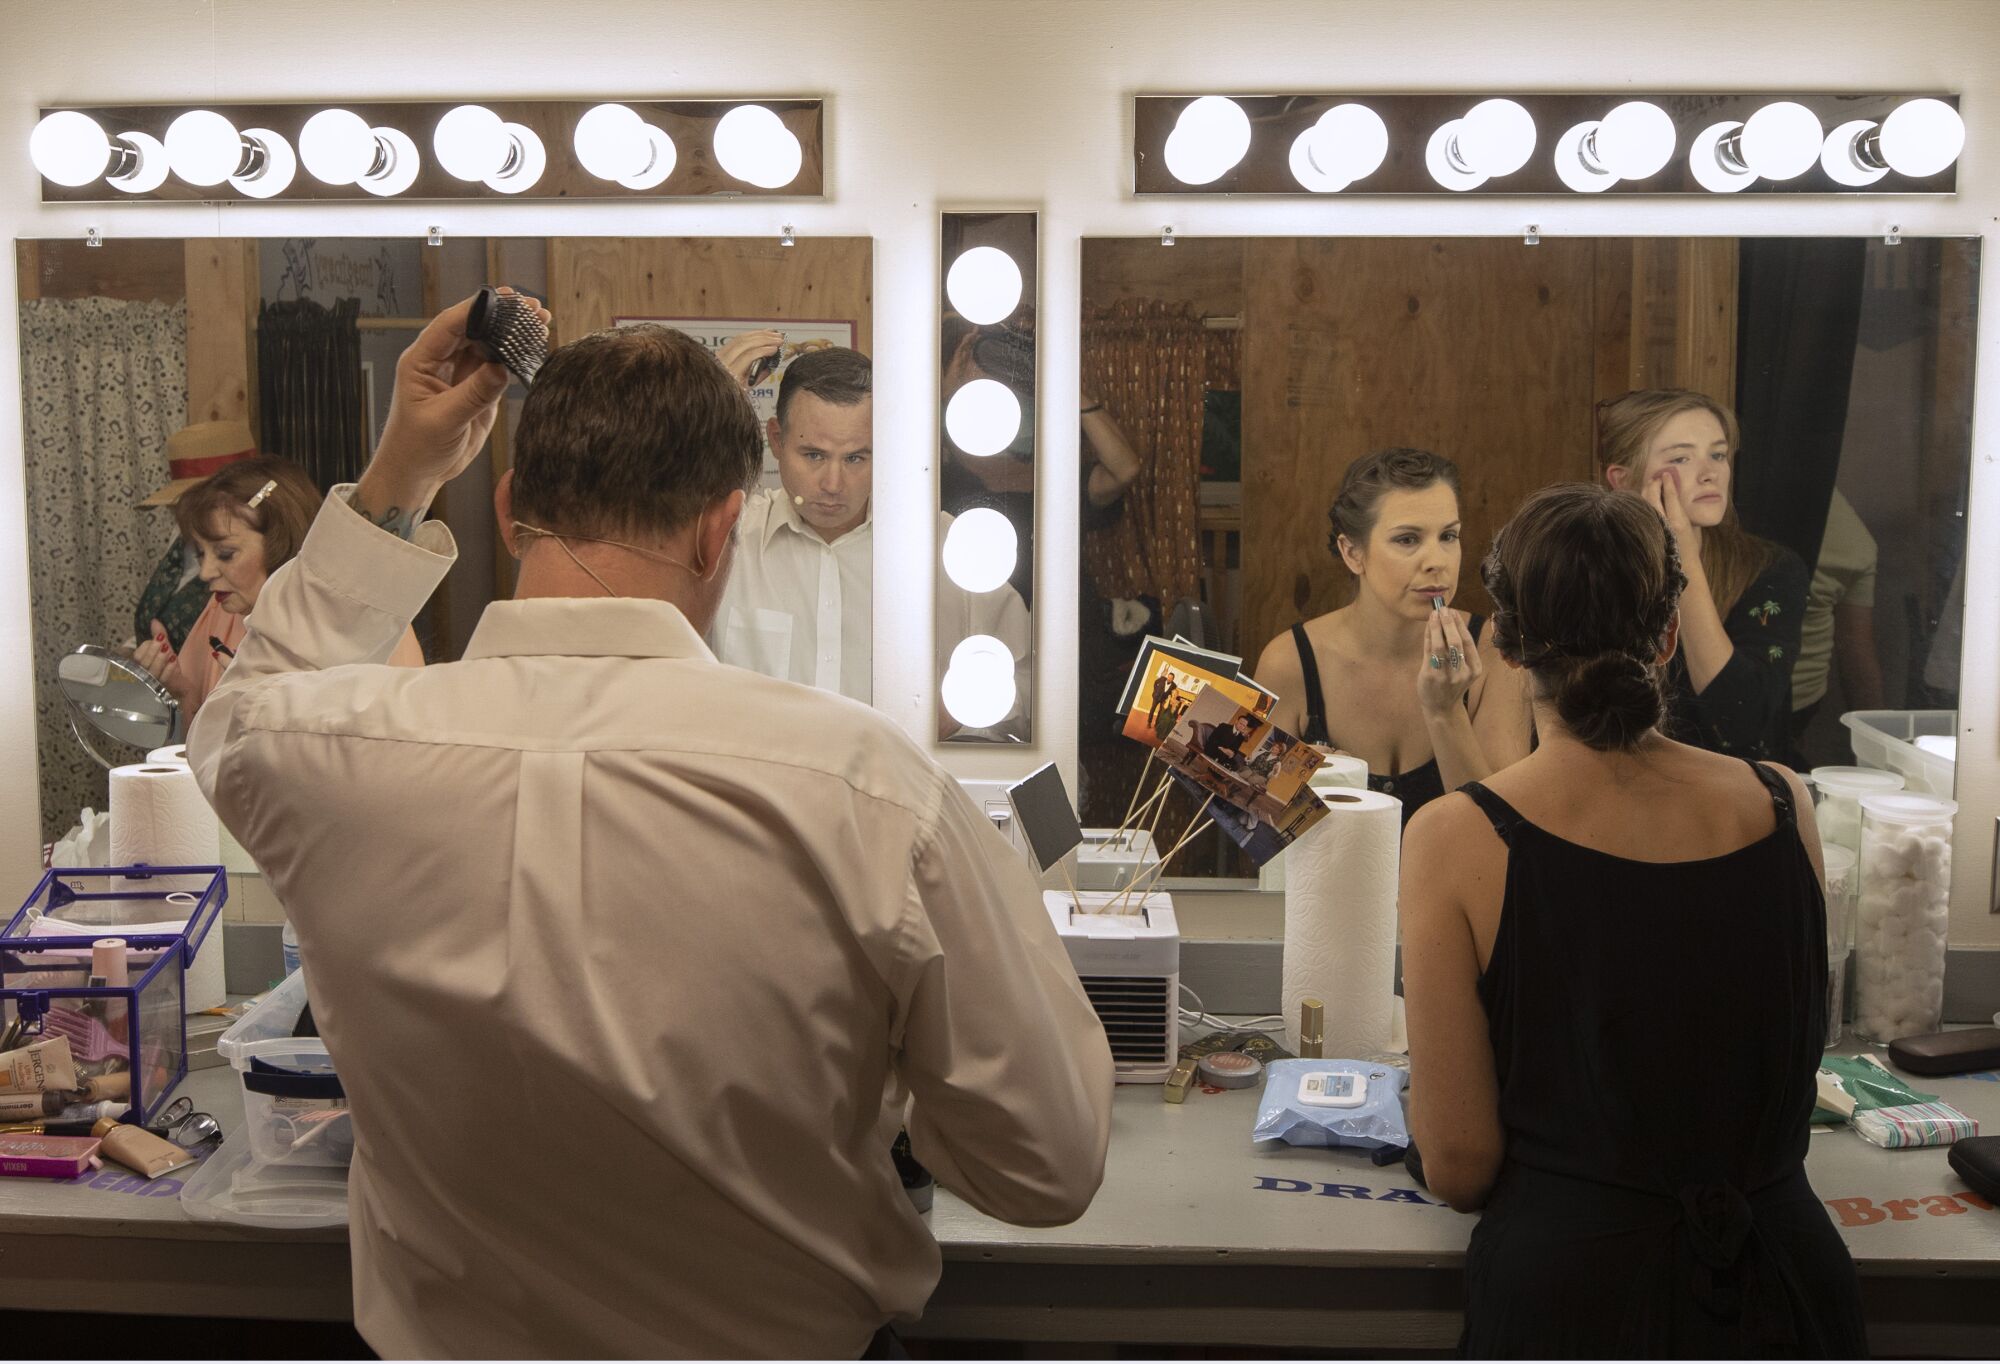 Actors look in dressing room mirrors while putting on makeup